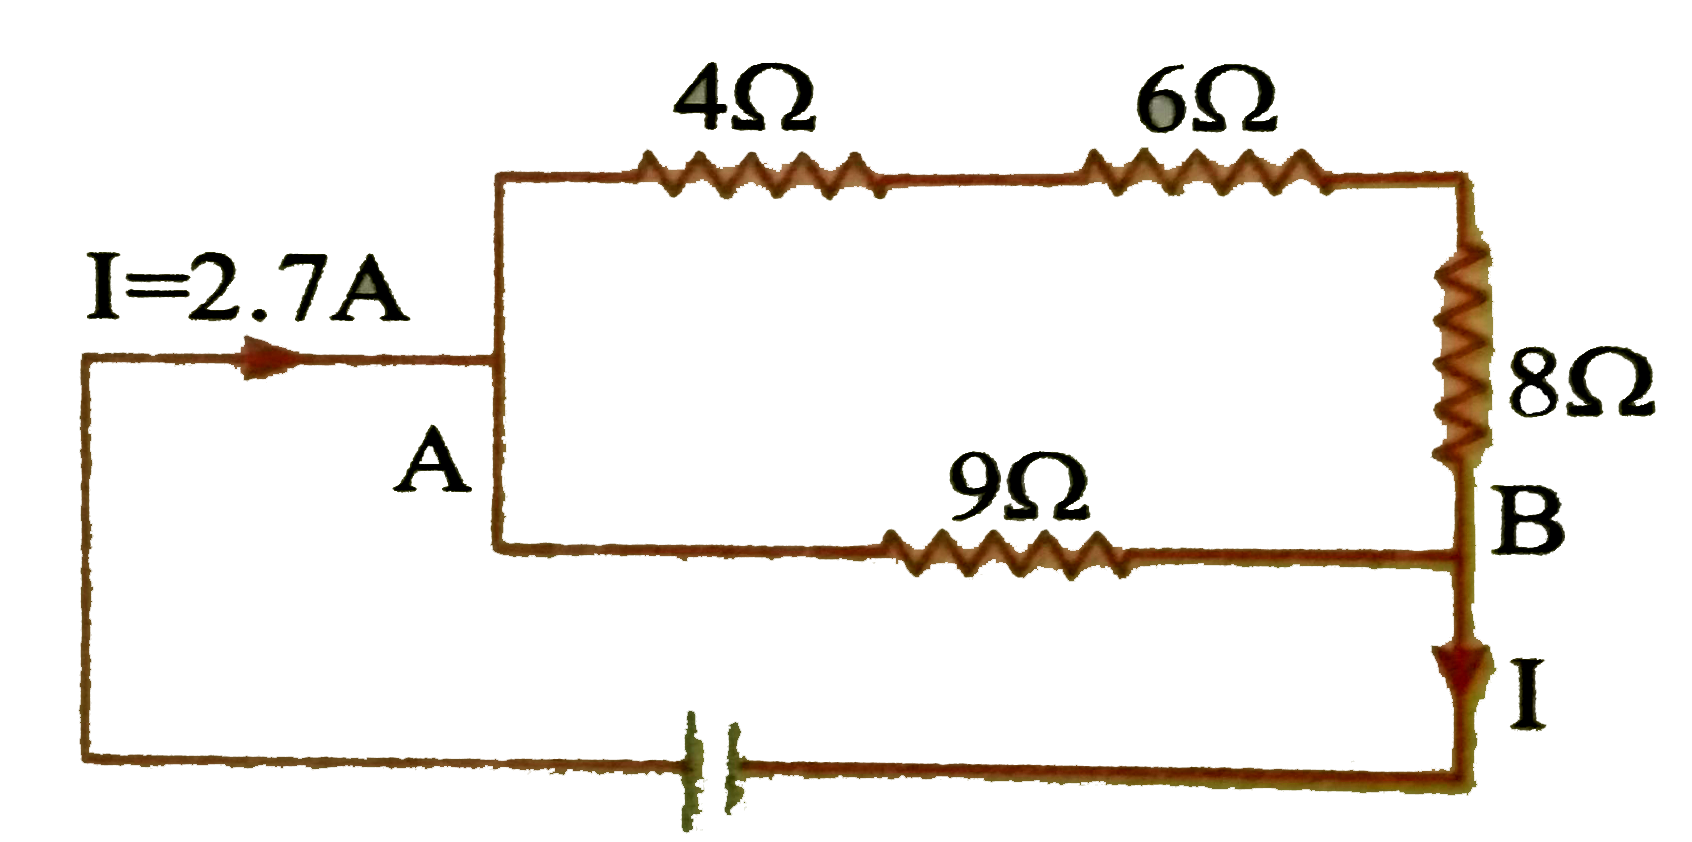 Find potential difference between points A and B of the network shown in fig. and distribution of given main current through different resistors.